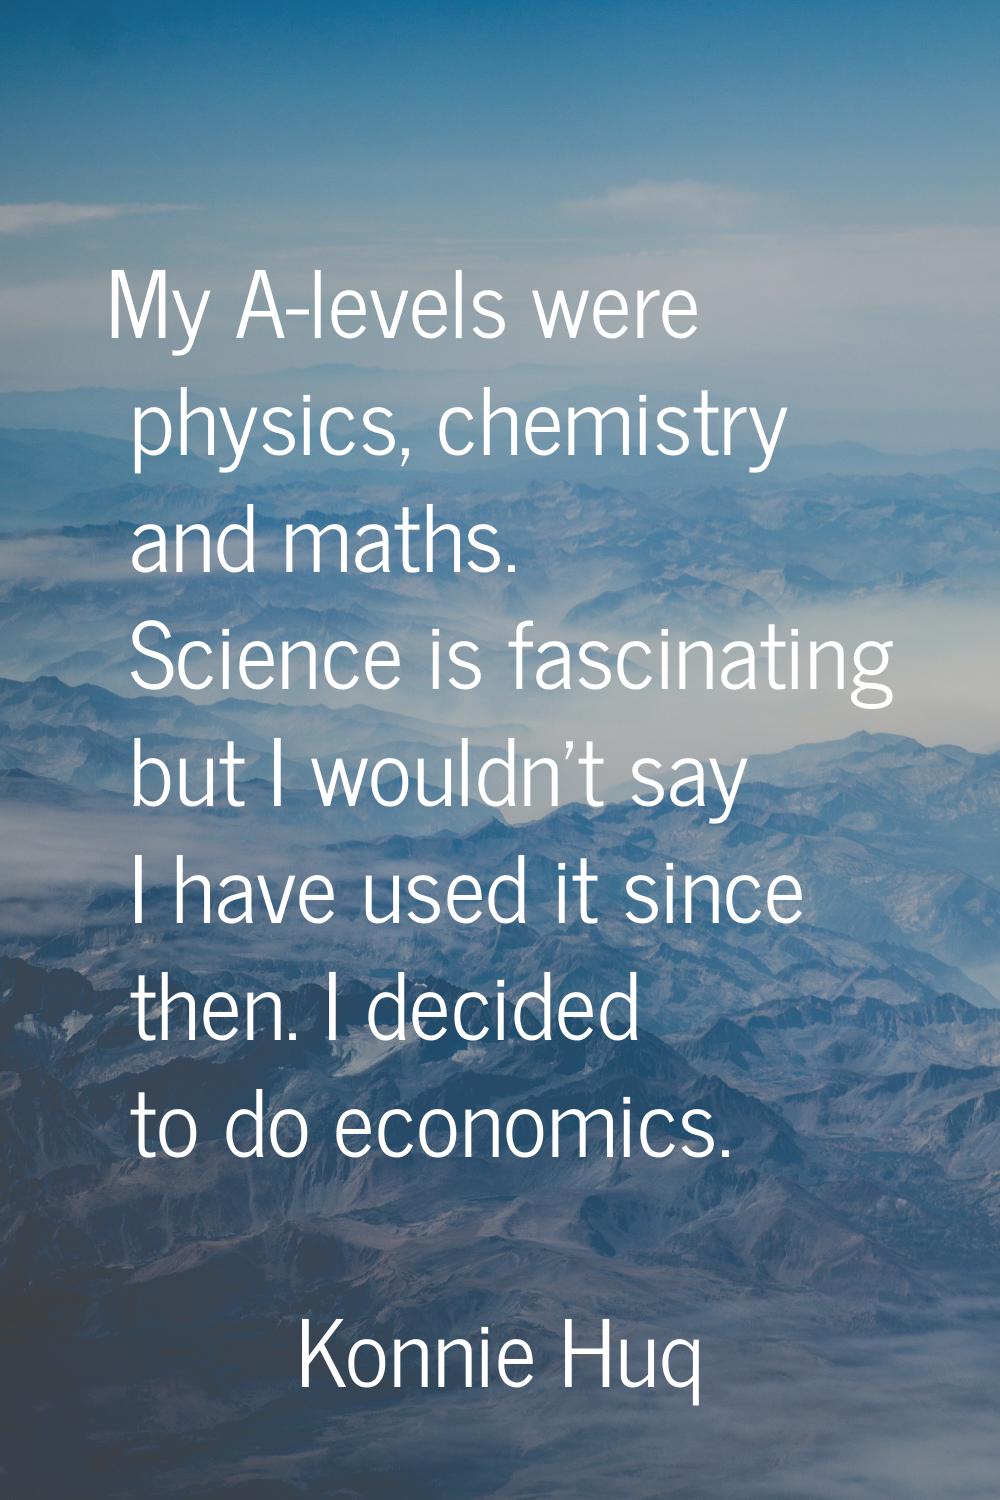 My A-levels were physics, chemistry and maths. Science is fascinating but I wouldn't say I have use